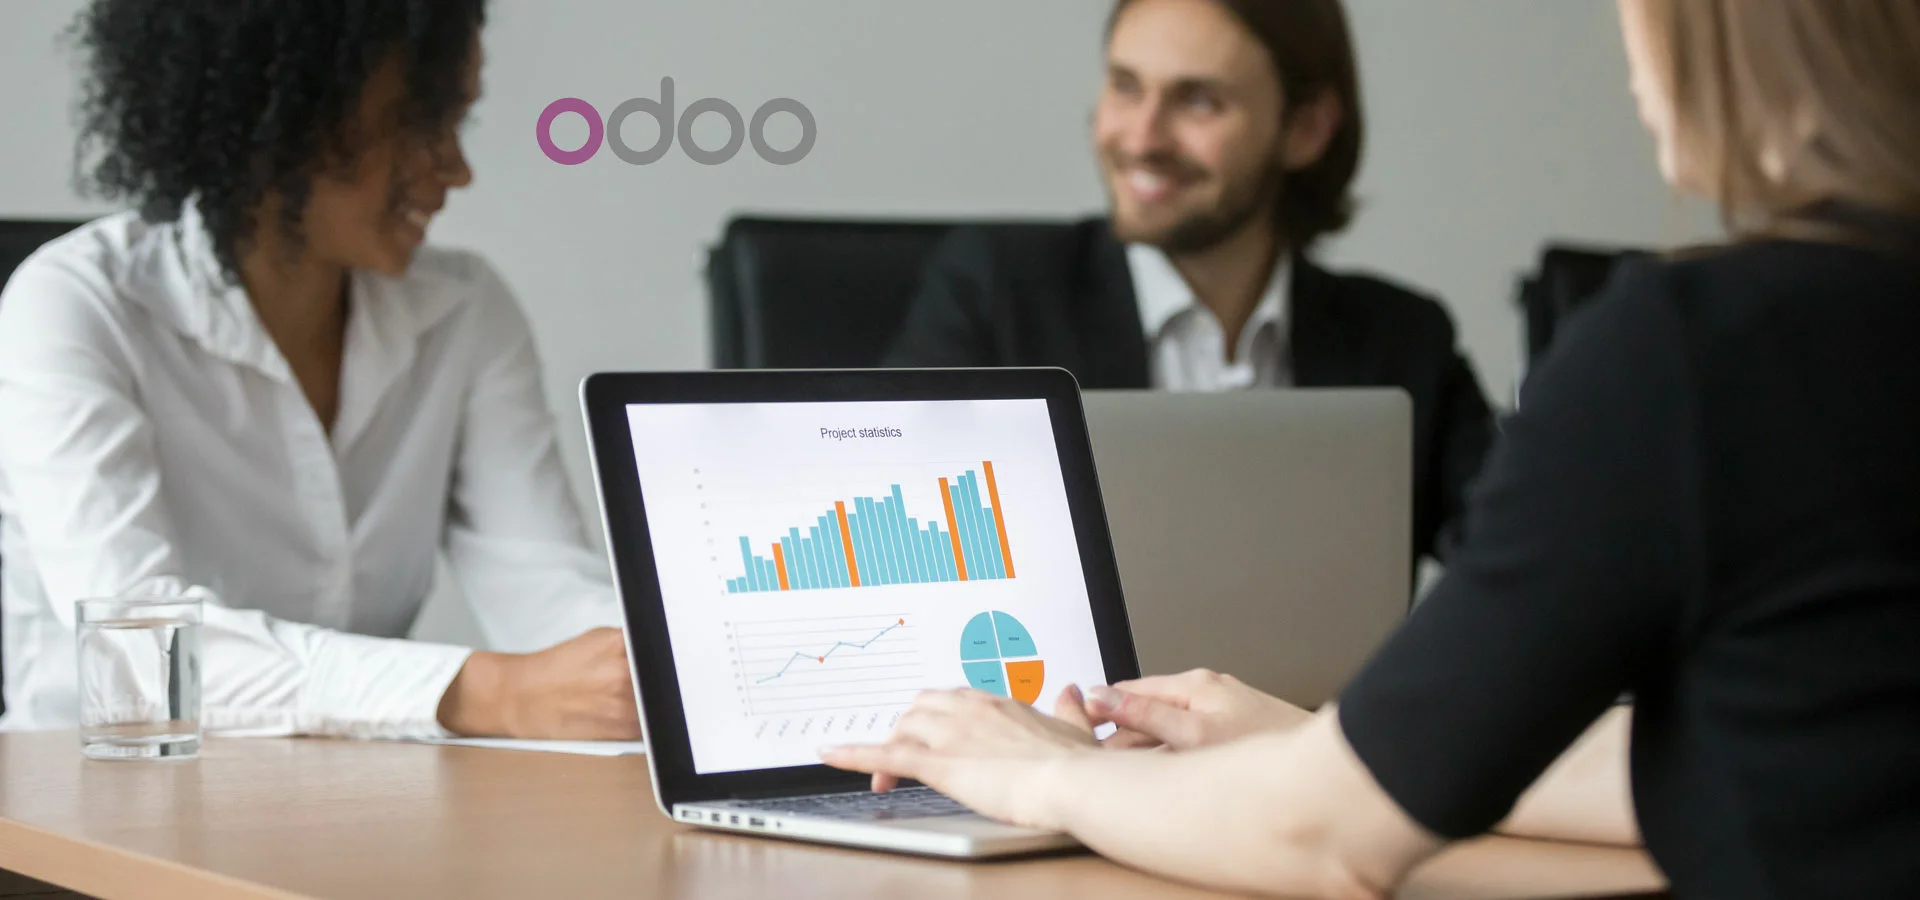 odoo-erp-support-and-services-related-blog-101